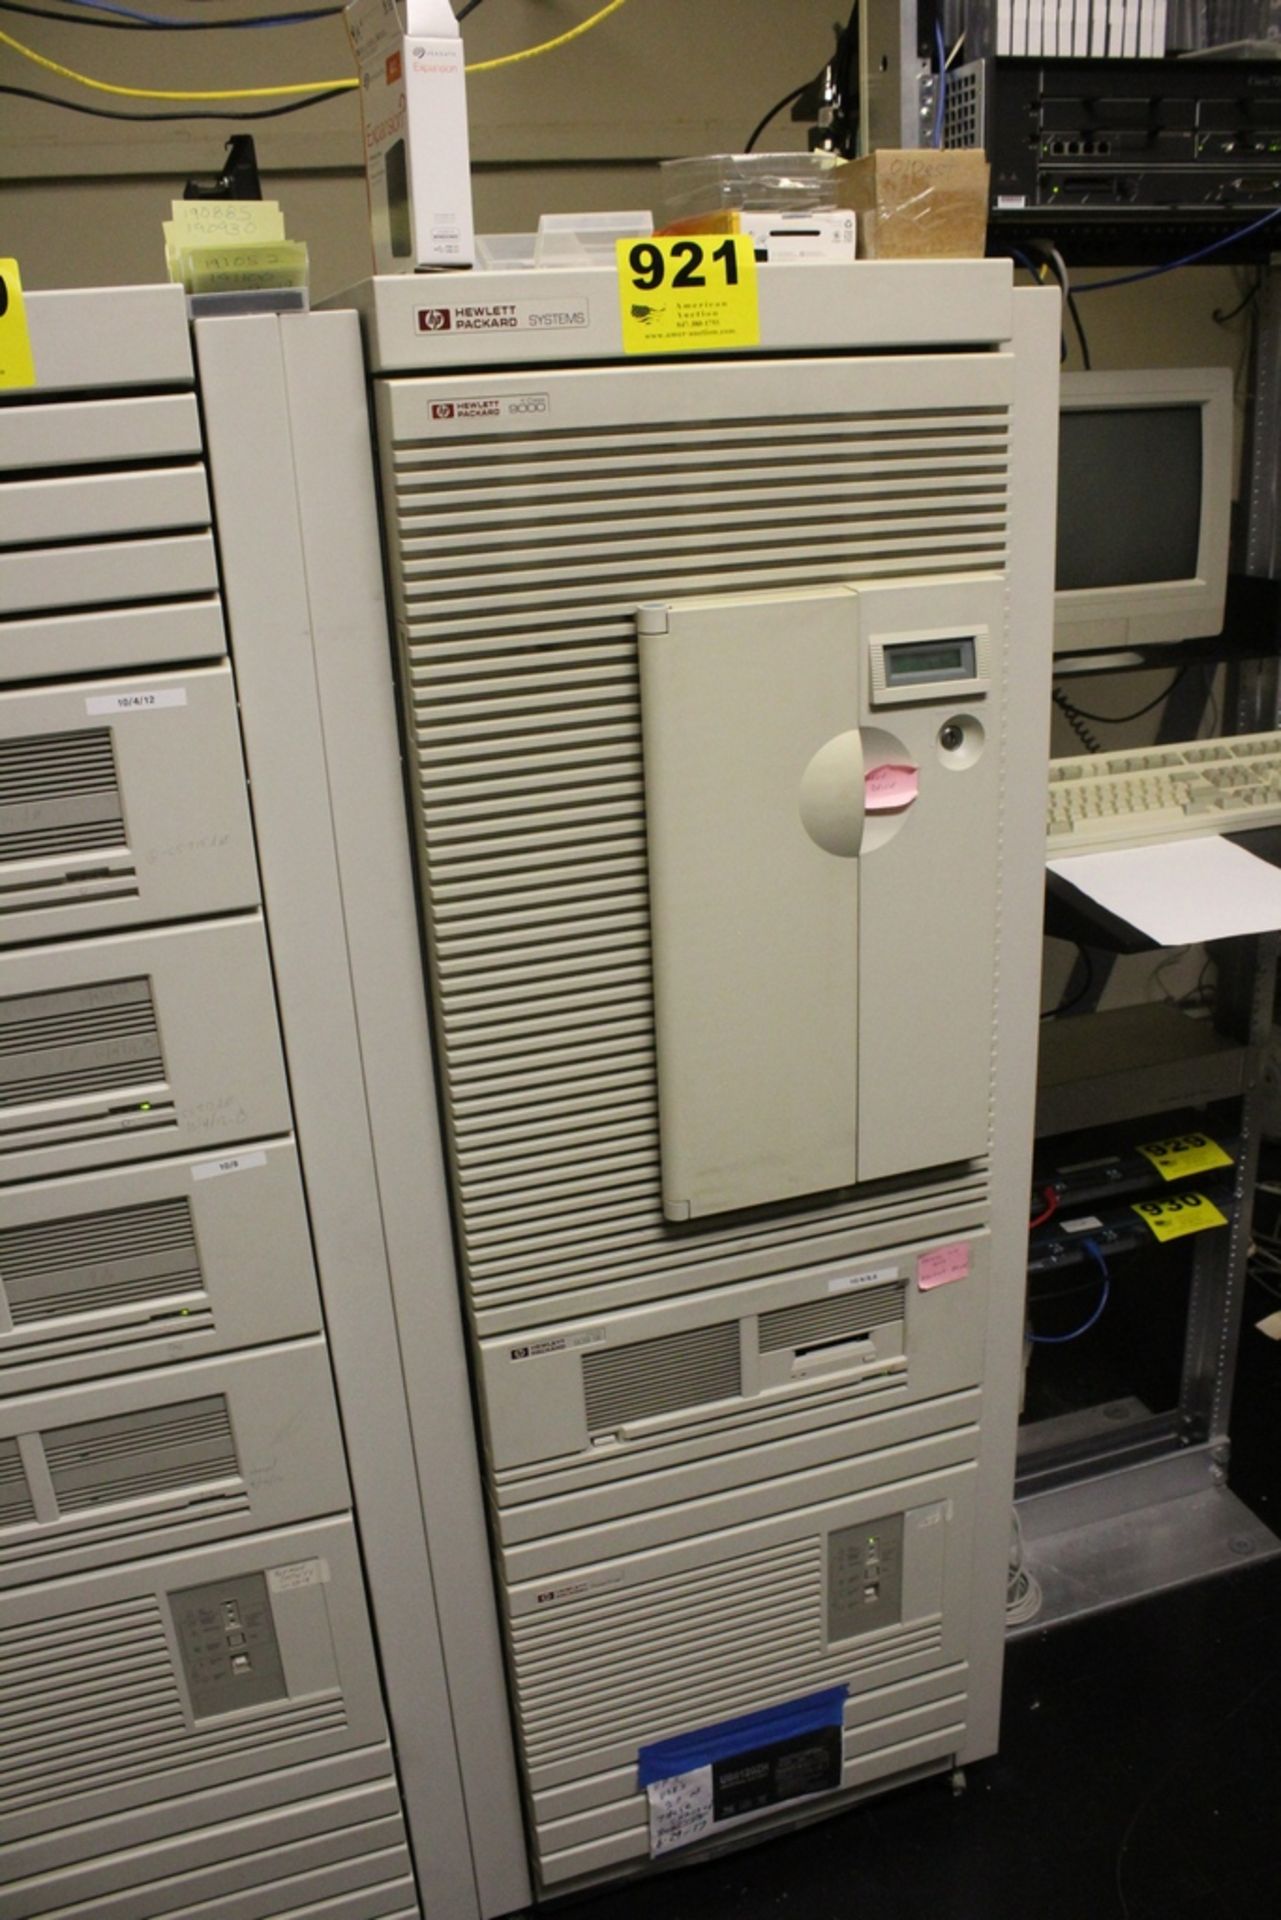 HEWLETT PACKARD SERVER SYSTEM WITH K-CLASS 9000, SCSI SE AND POWER TRUST